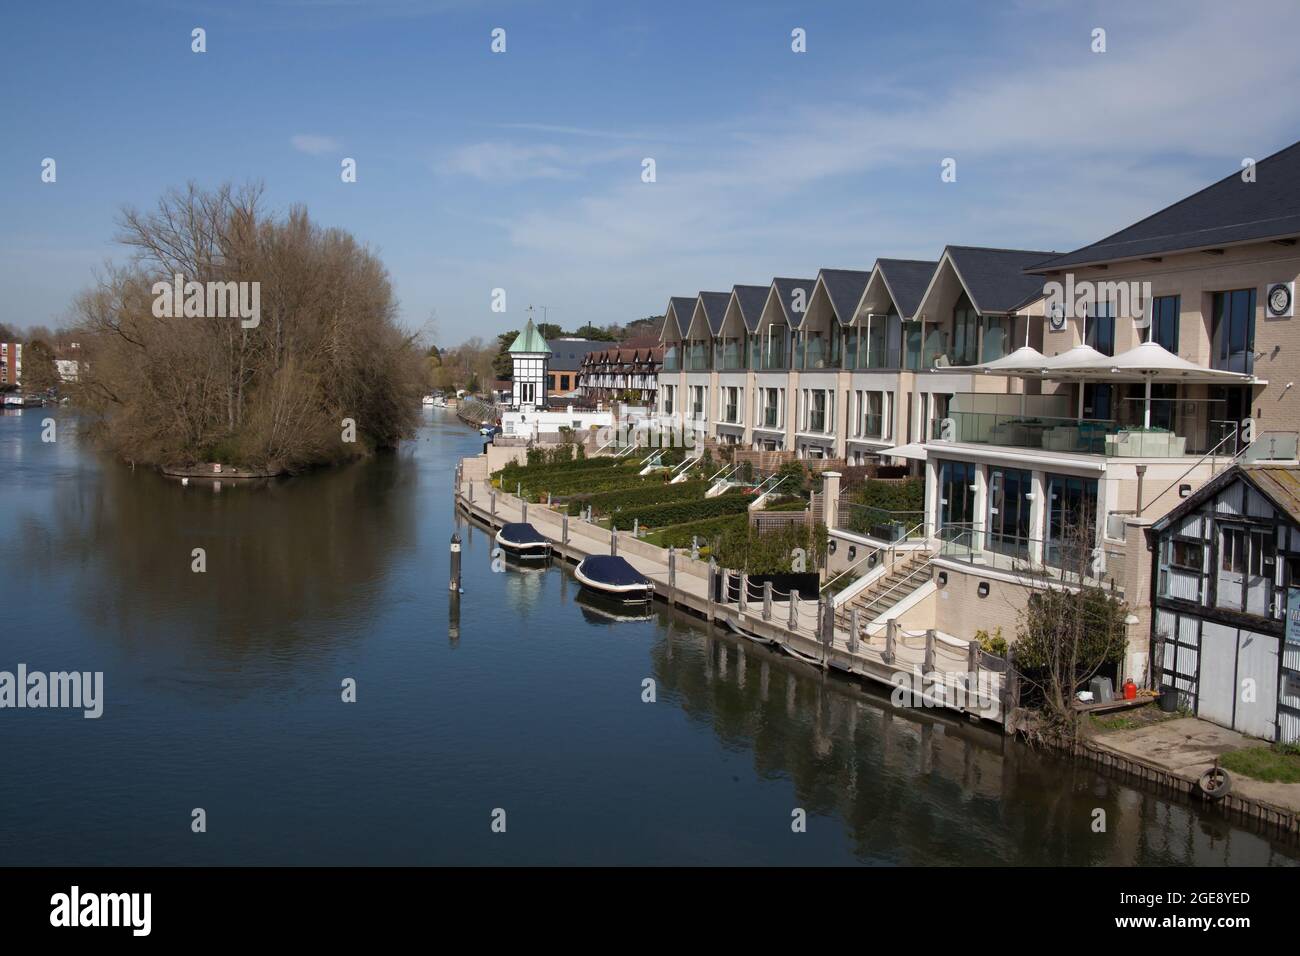 Views of the Thames River at Maidenhead in Berkshire in the UK Stock Photo